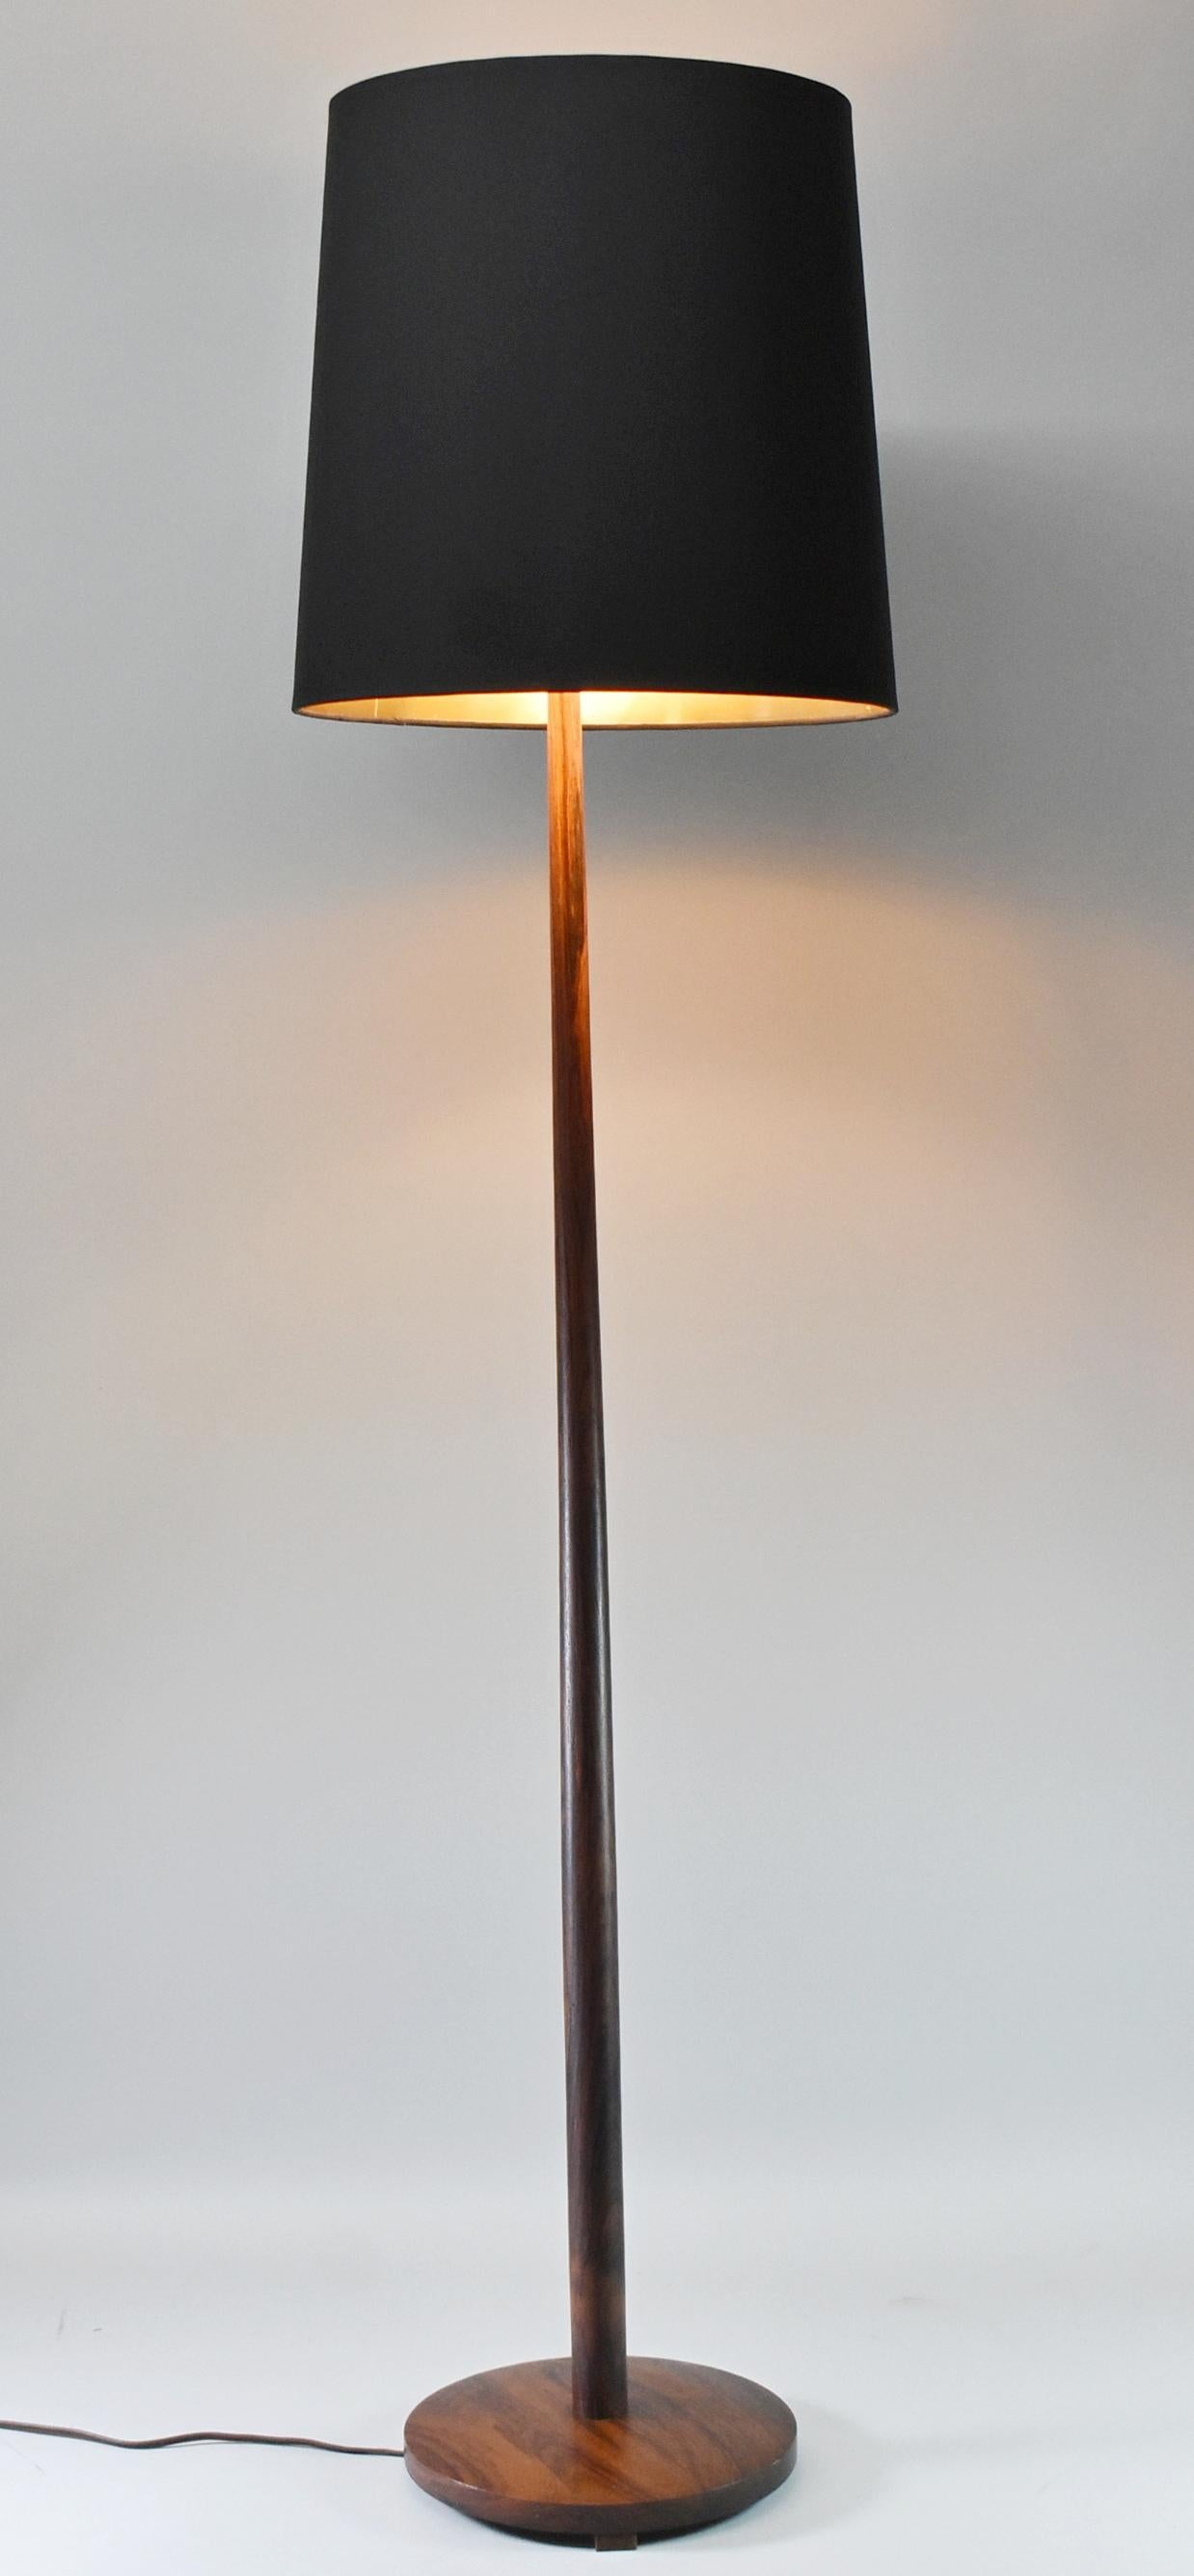 Mid-century modern Danish teak floor lamp by Kovacs. This lamp features a new shade and has been rewired. It is stamped SI 621 and labeled Made in Sweden. Very nice condition with a few dings on the base as shown. 56